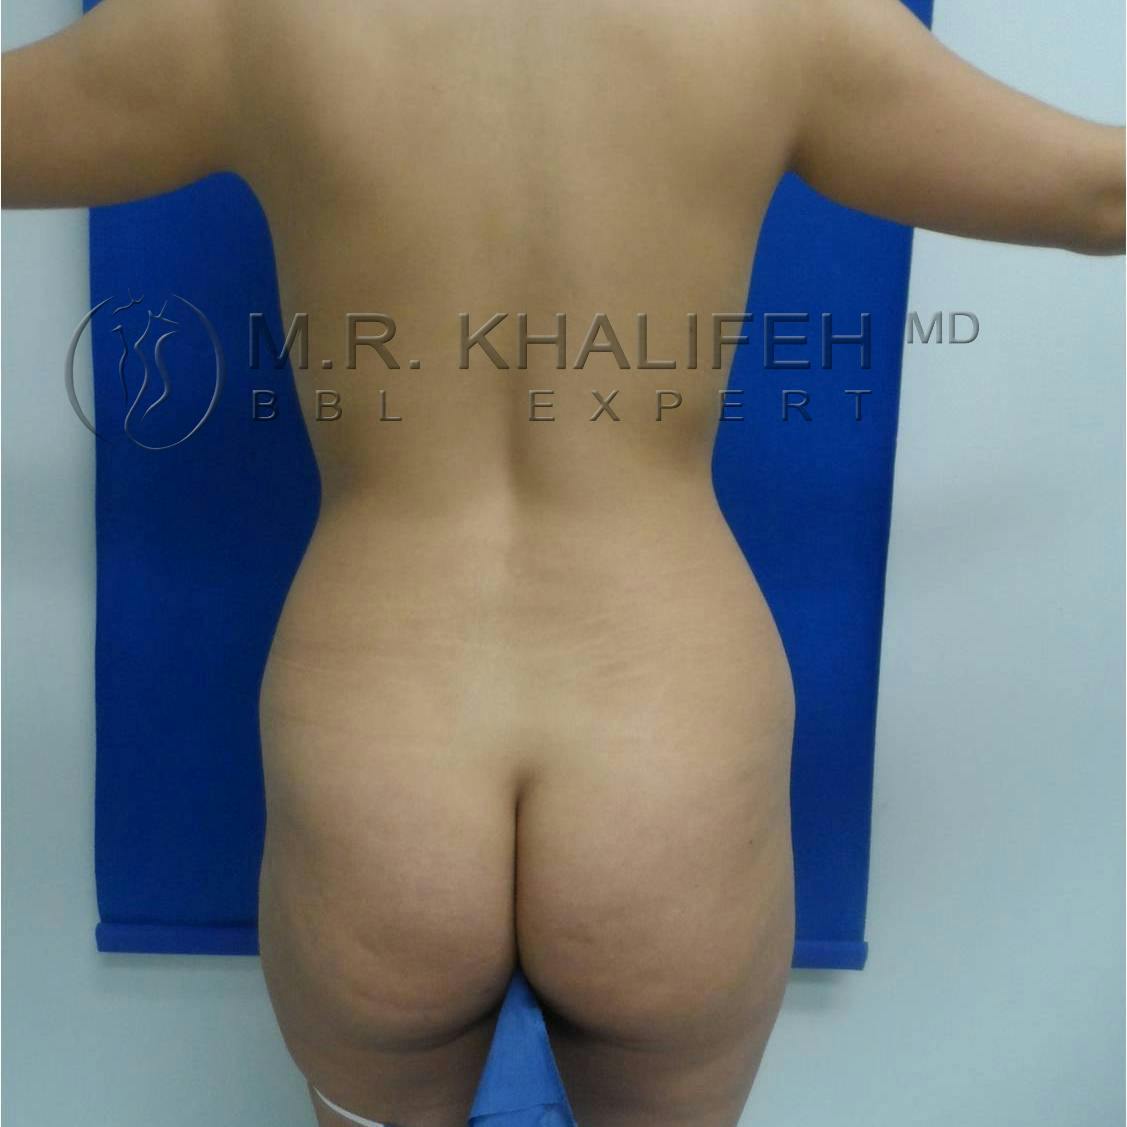 Flank-Lower Back Liposuction Gallery - Patient 3719503 - Image 1